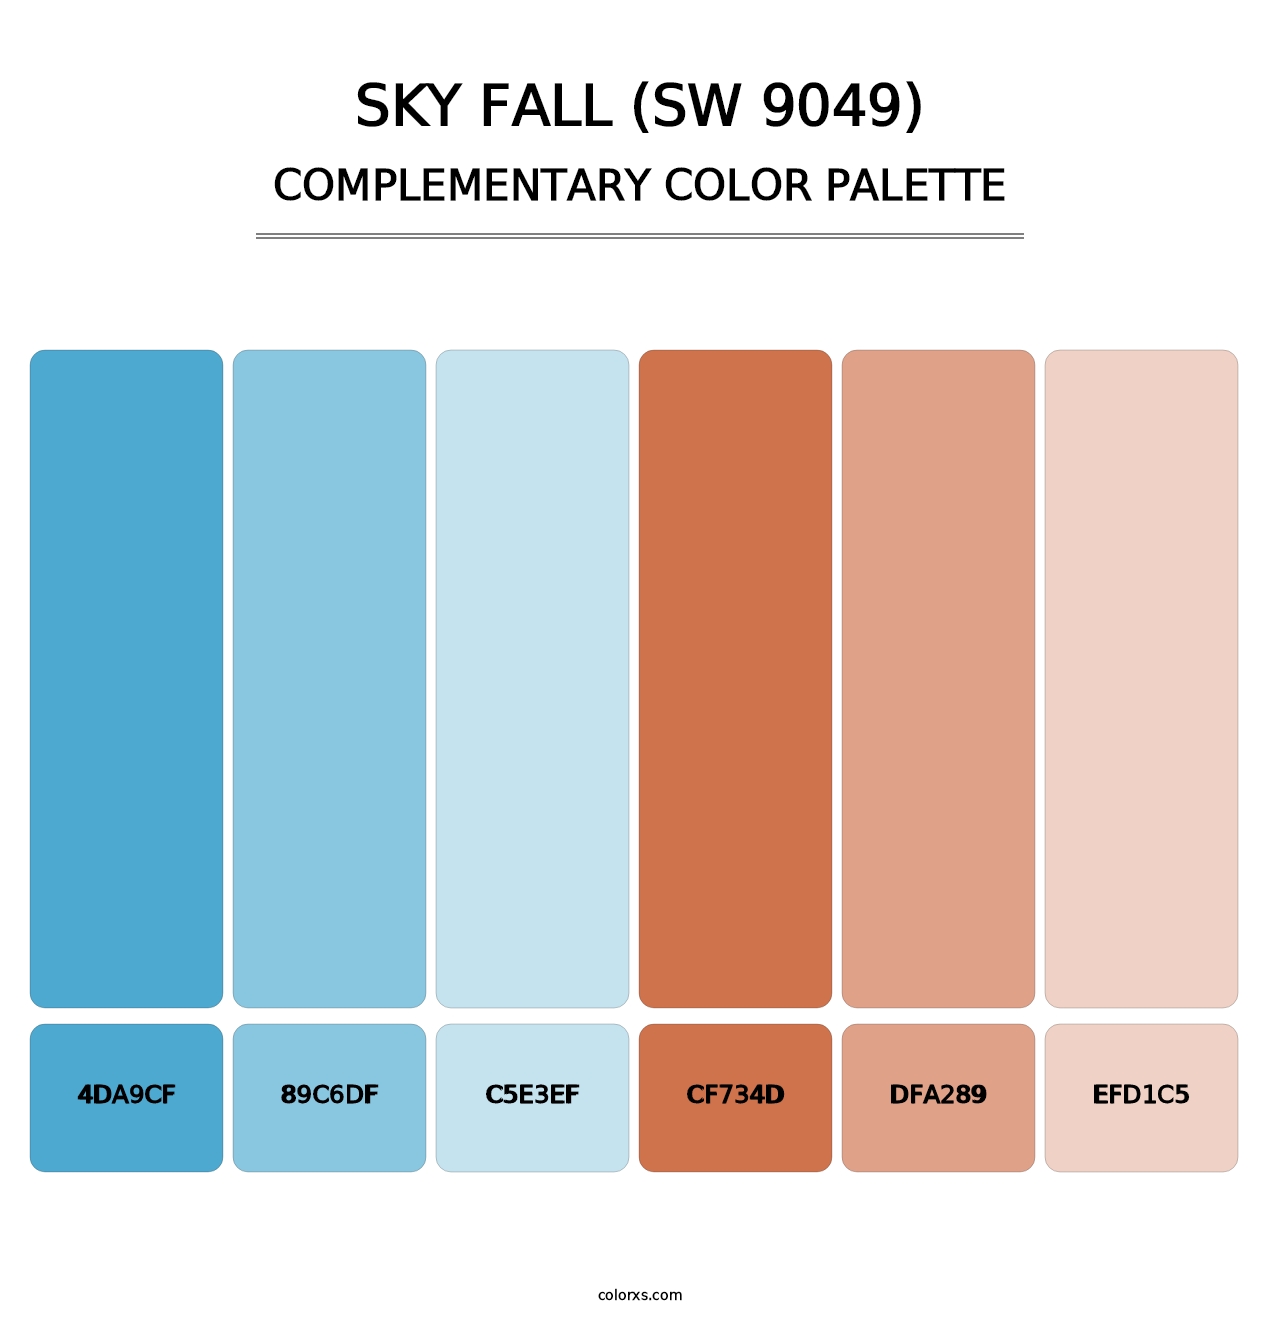 Sky Fall (SW 9049) - Complementary Color Palette